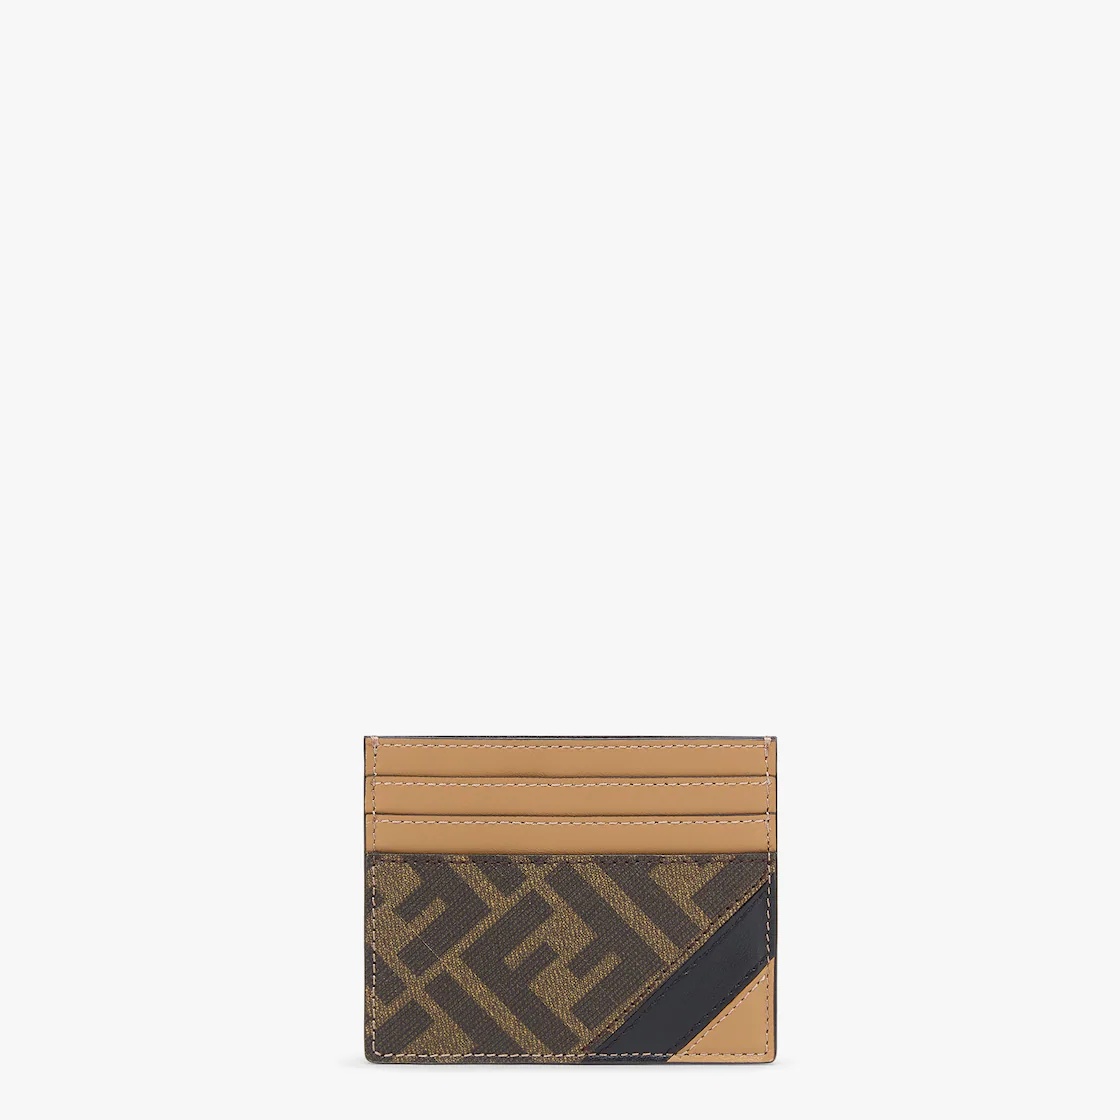 Card holder with six slots and flat central pocket. Made of textured fabric with FF motif in brown a - 1